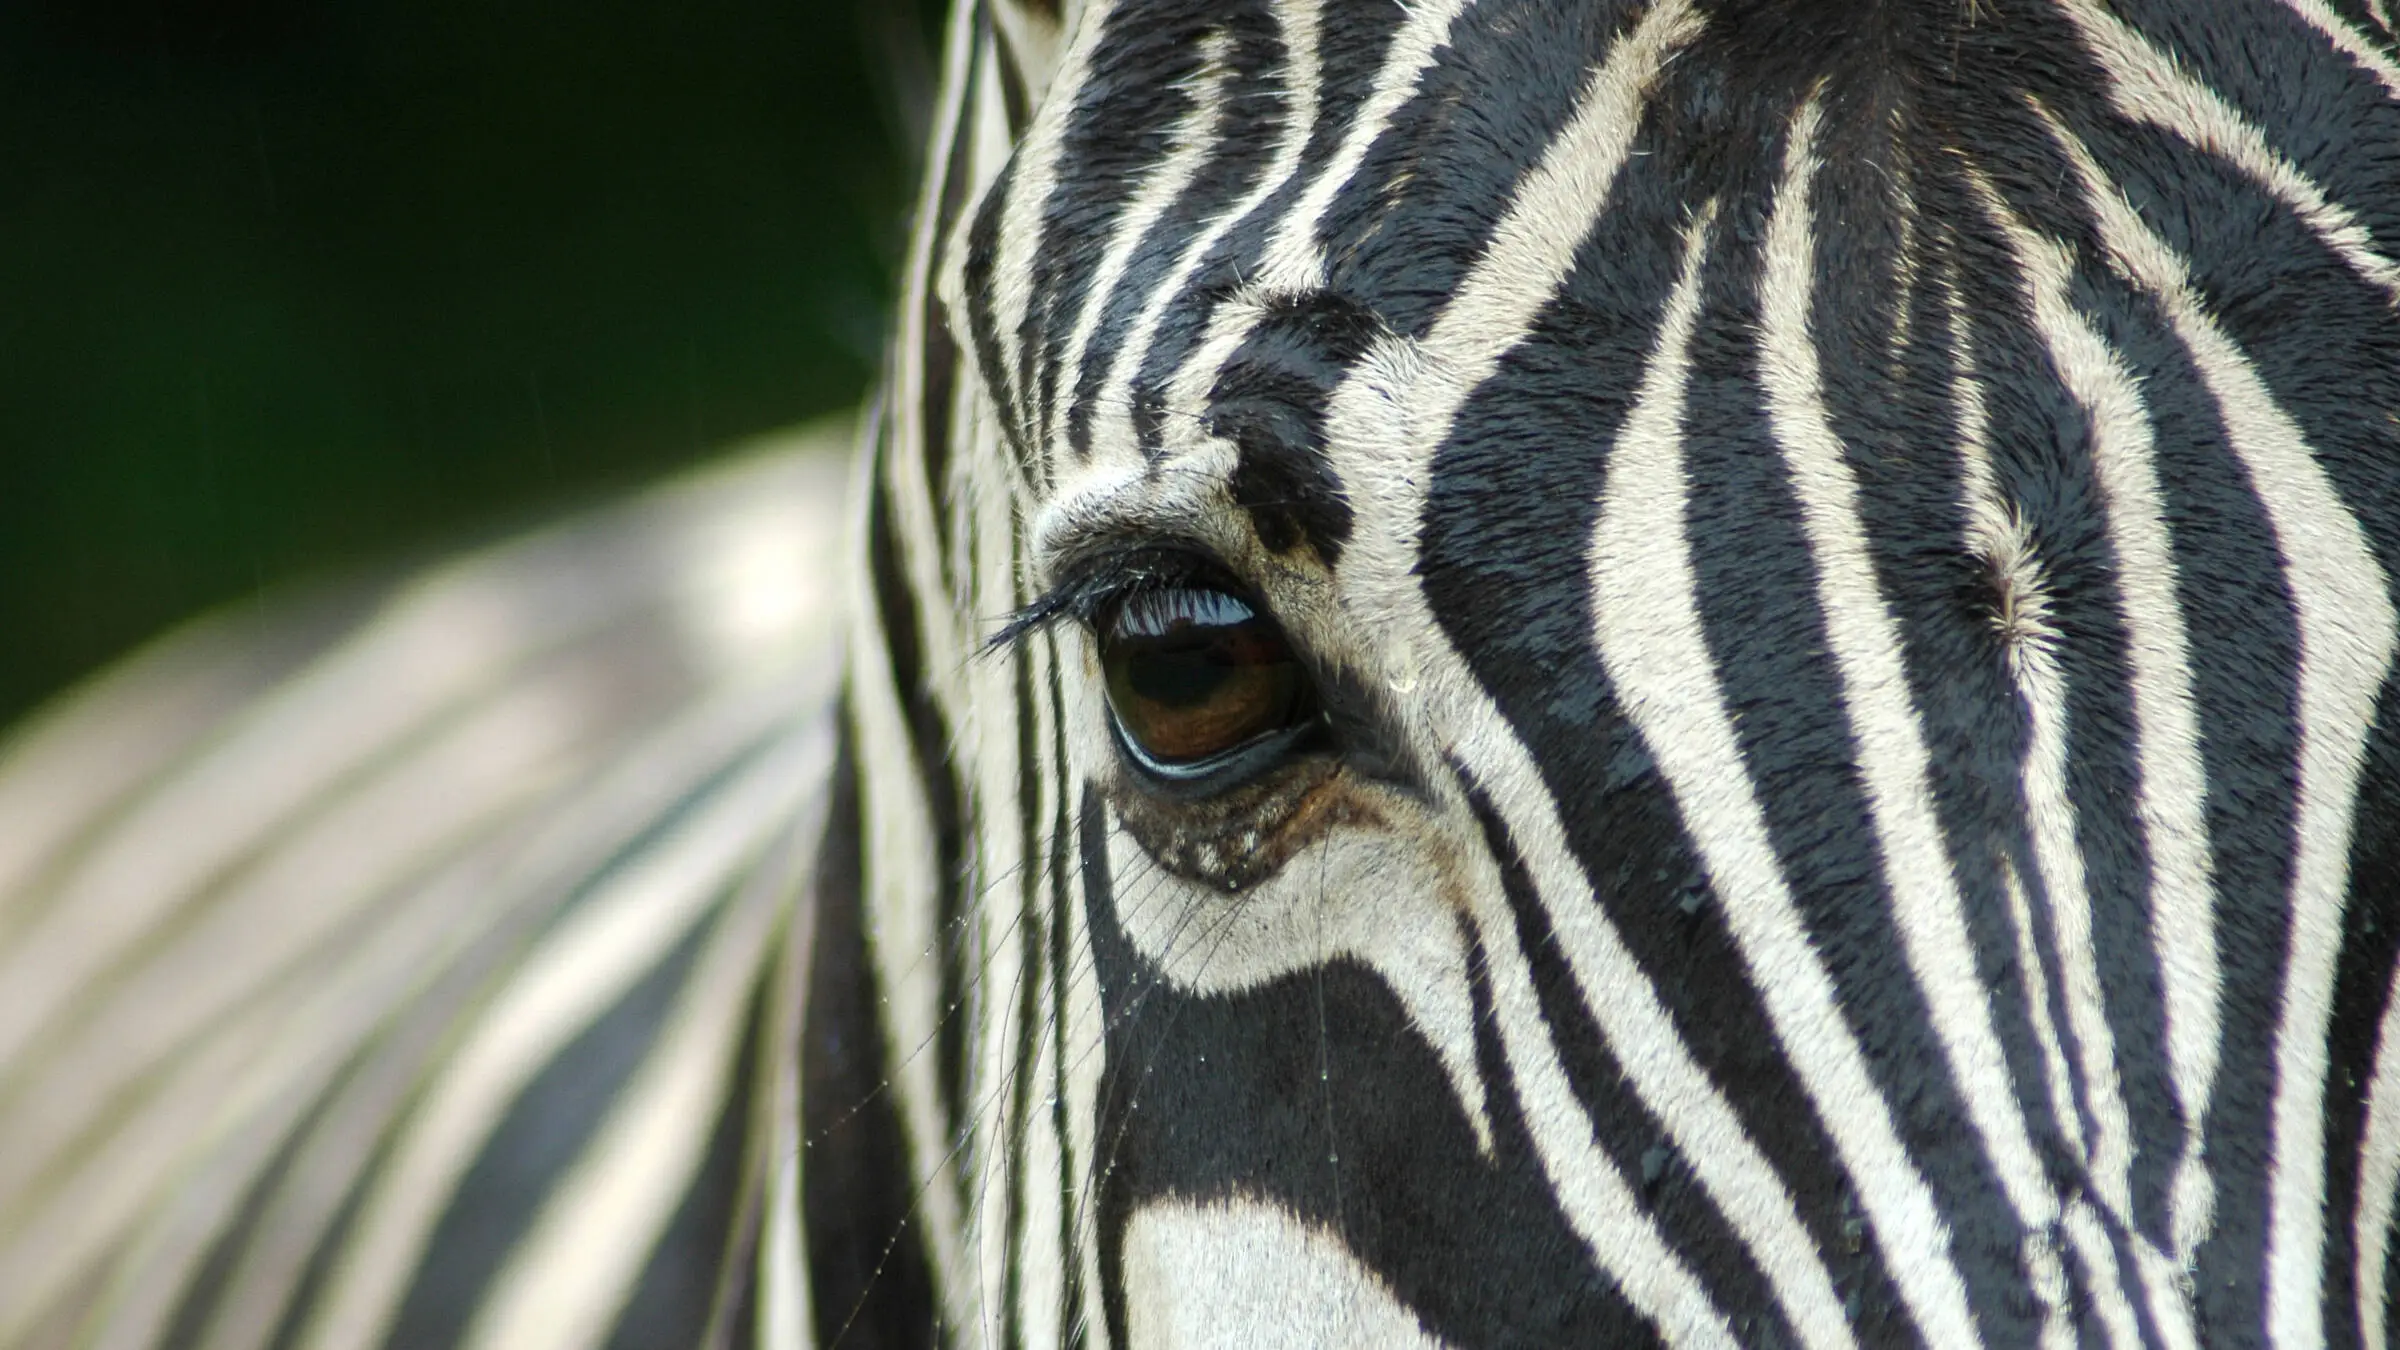 Detailed view of a zebra head